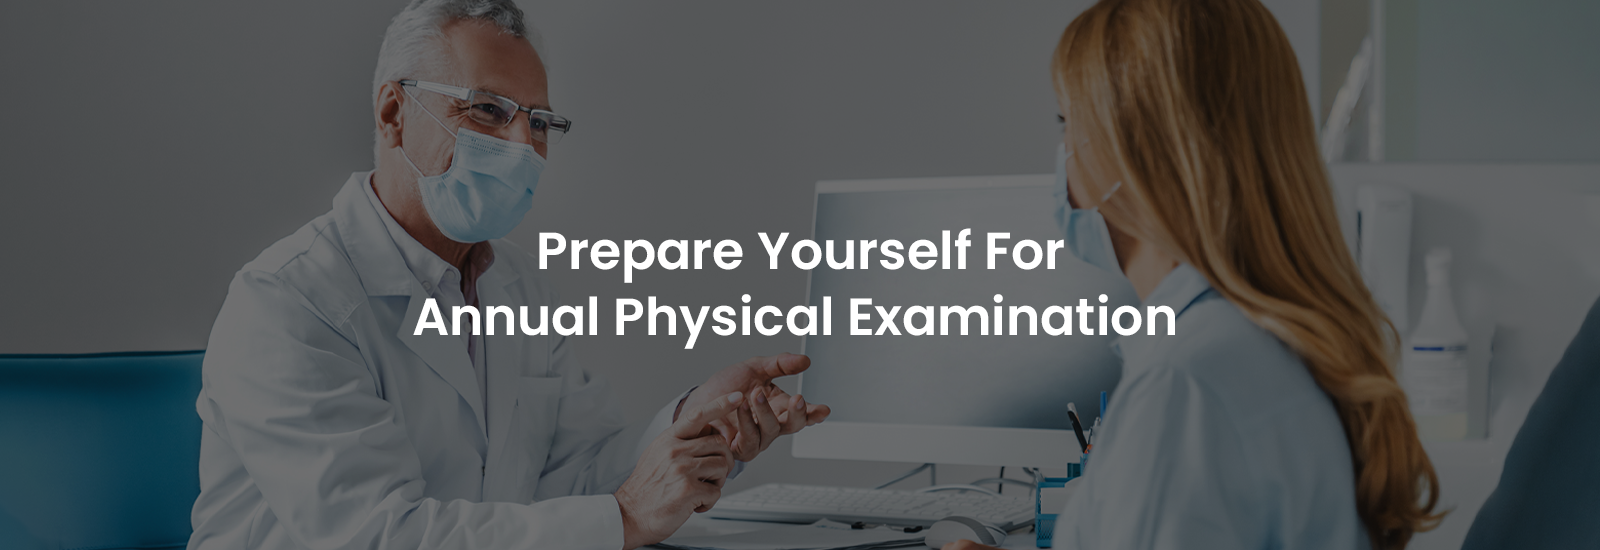 Prepare Yourself for Your Annual Physical Examination | Banner Image